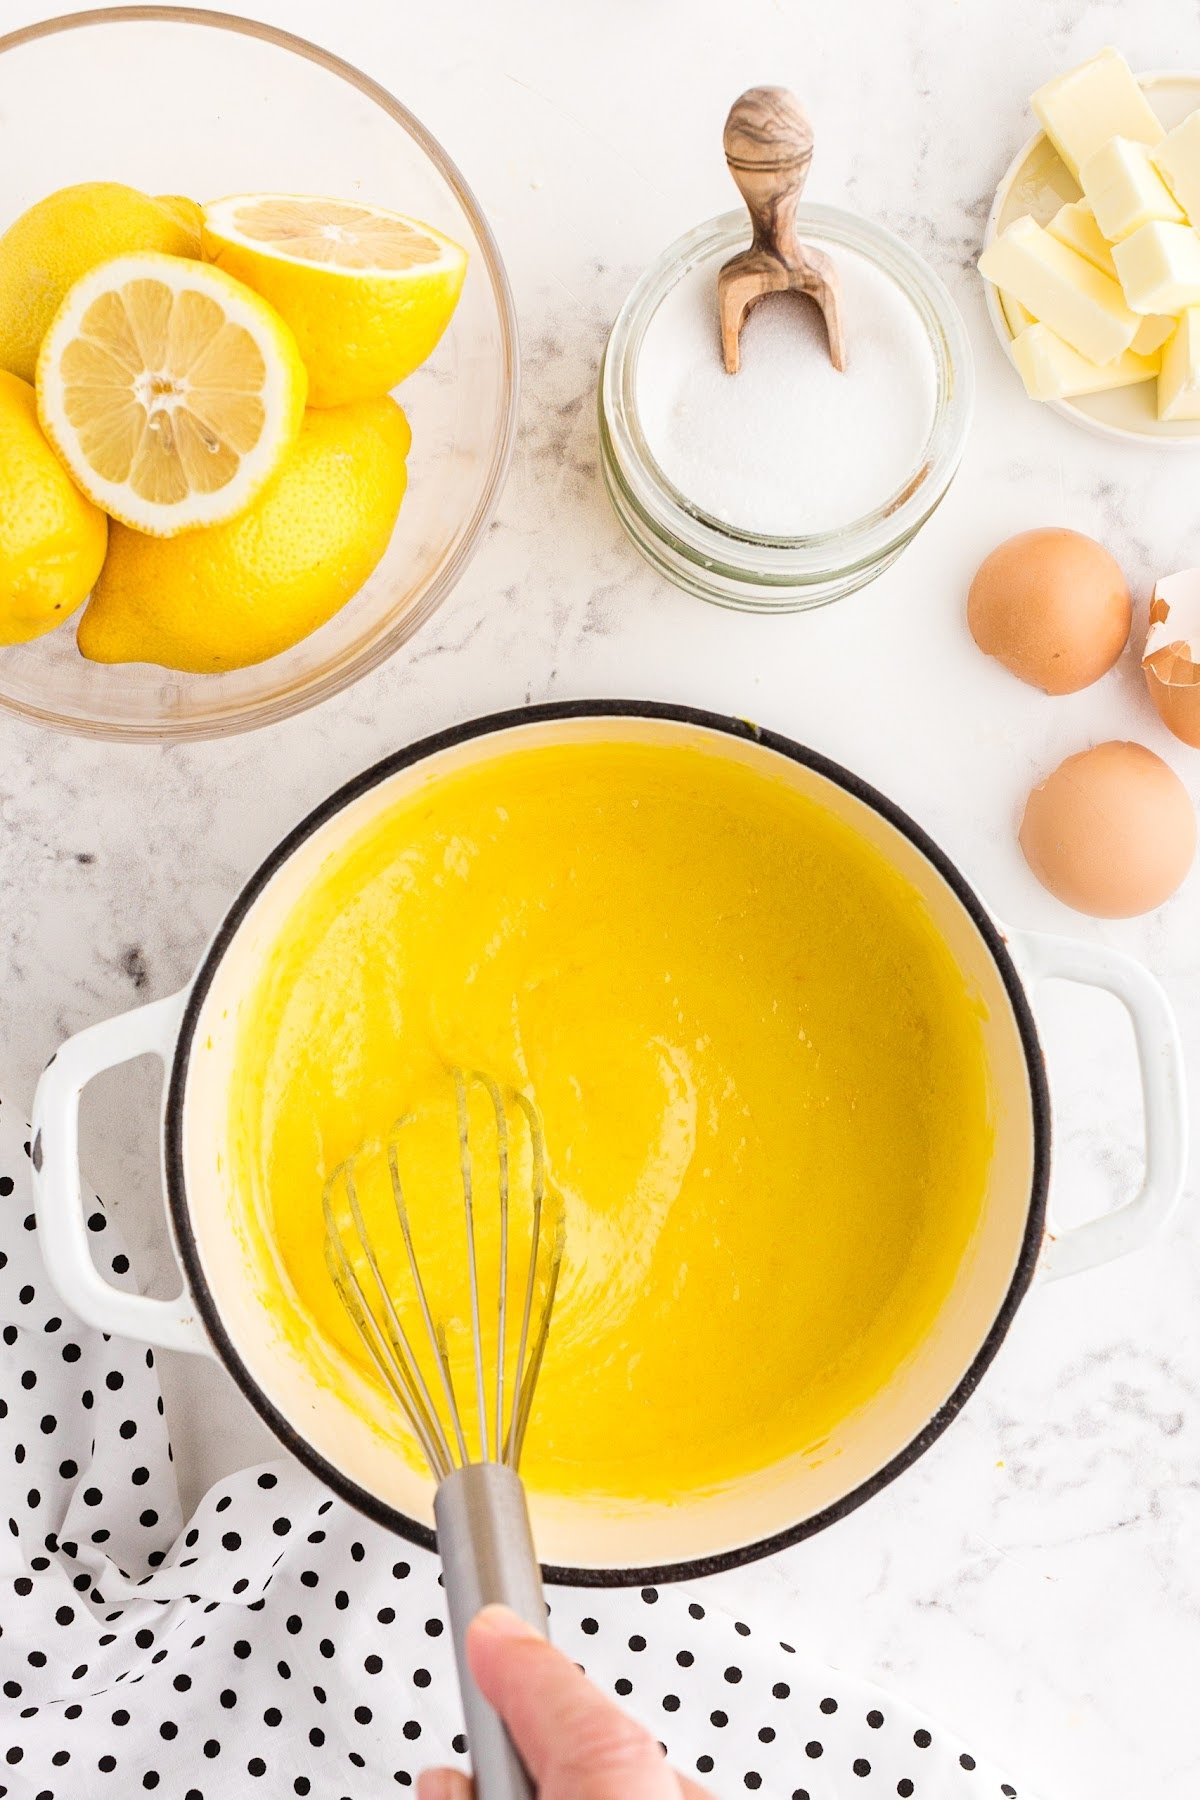 Lemon curd is cooked and creamy on the stove top in a pan.